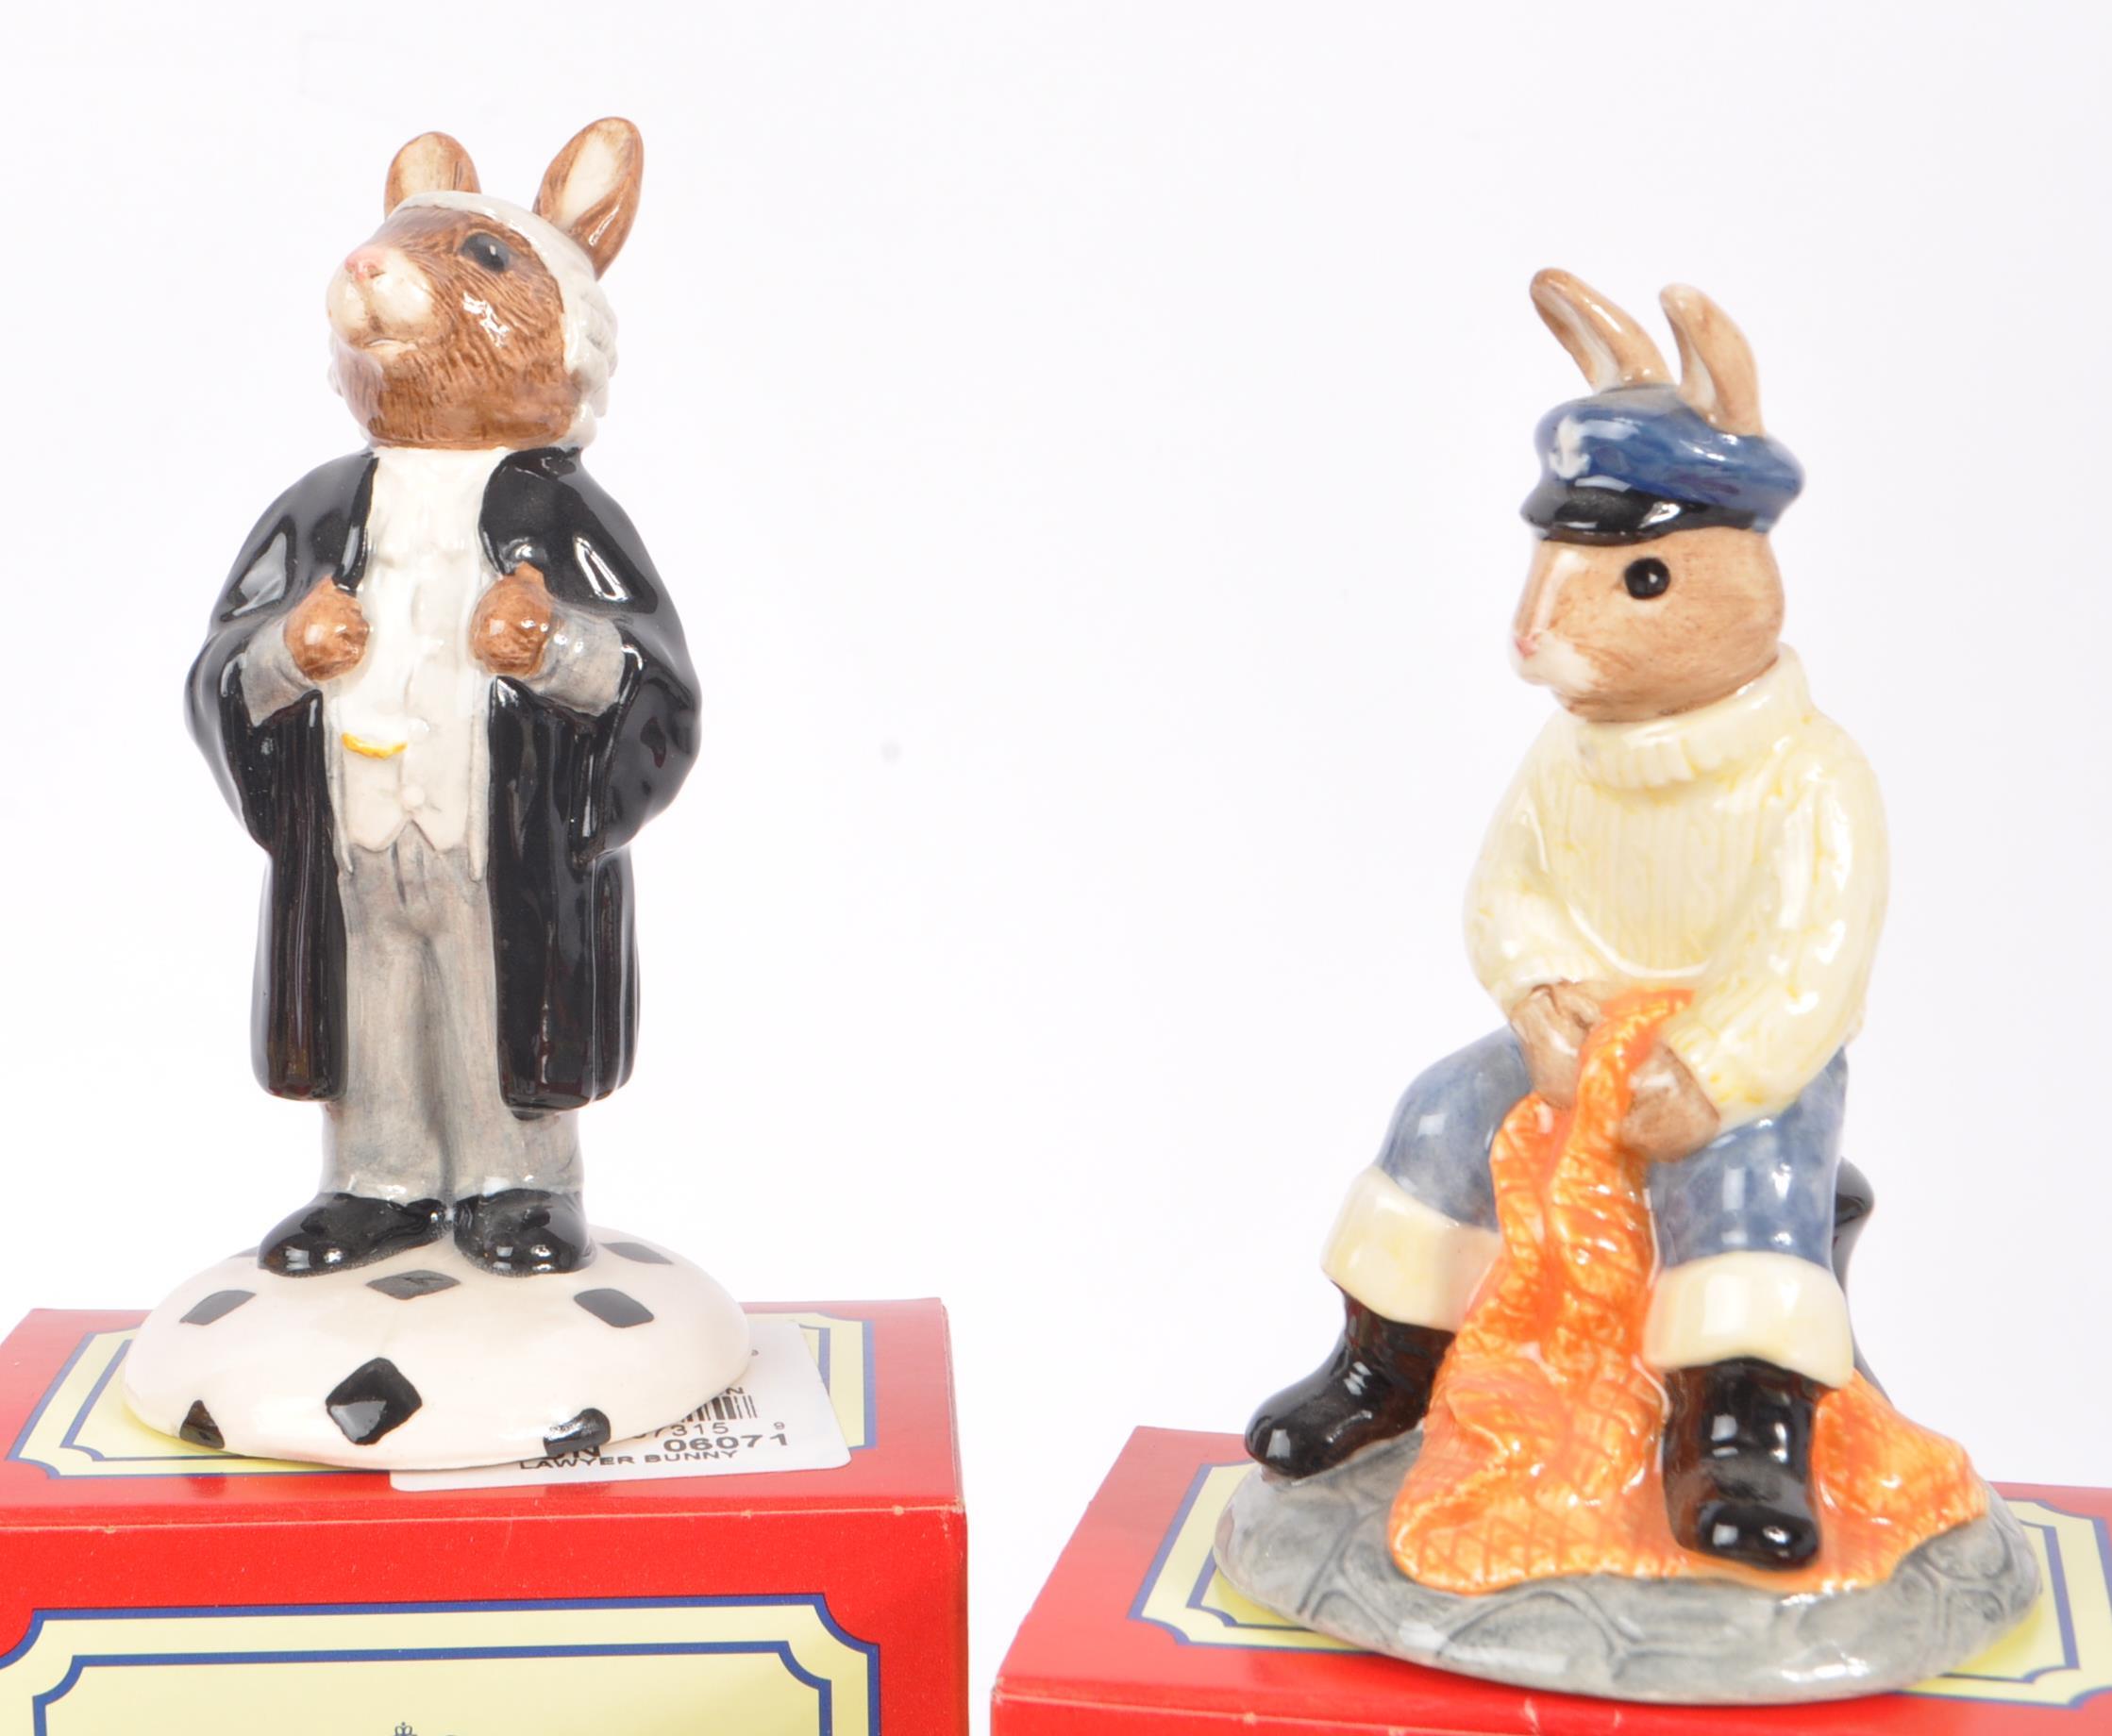 ROYAL DOULTON - BUNNYKINS - COLLECTION OF PORCELAIN FIGURES - Image 3 of 6